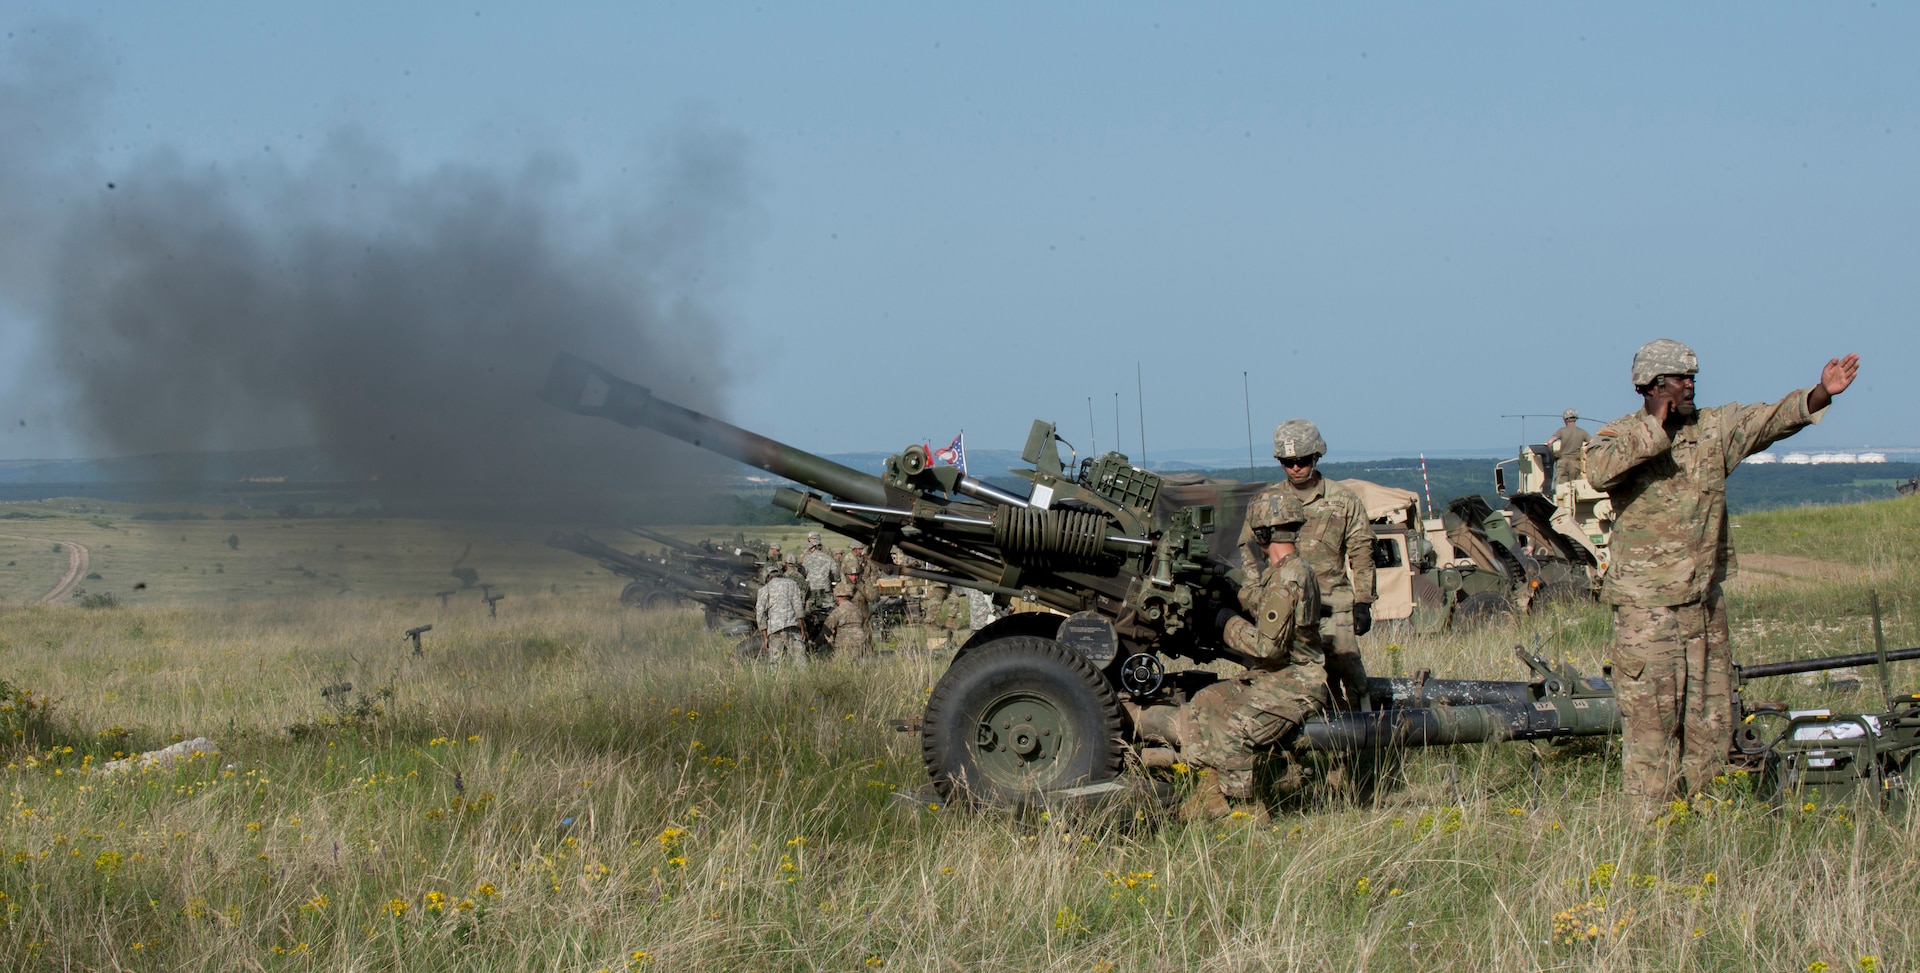 Soldiers with Battery A, 1st Battalion, 134th Field Artillery Regiment, Ohio Army National Guard, conduct live-fire artillery training with their M119A3 howitzer June 12, 2019, near Varpalota, Hungary. The units participated in Breakthrough 19, a Hungarian national training exercise that utilized multiple artillery systems from the Hungarian Defence Forces, U.S. Army Europe and Army National Guard units to create a collective capability that increases the interoperability and readiness of the participating militaries.